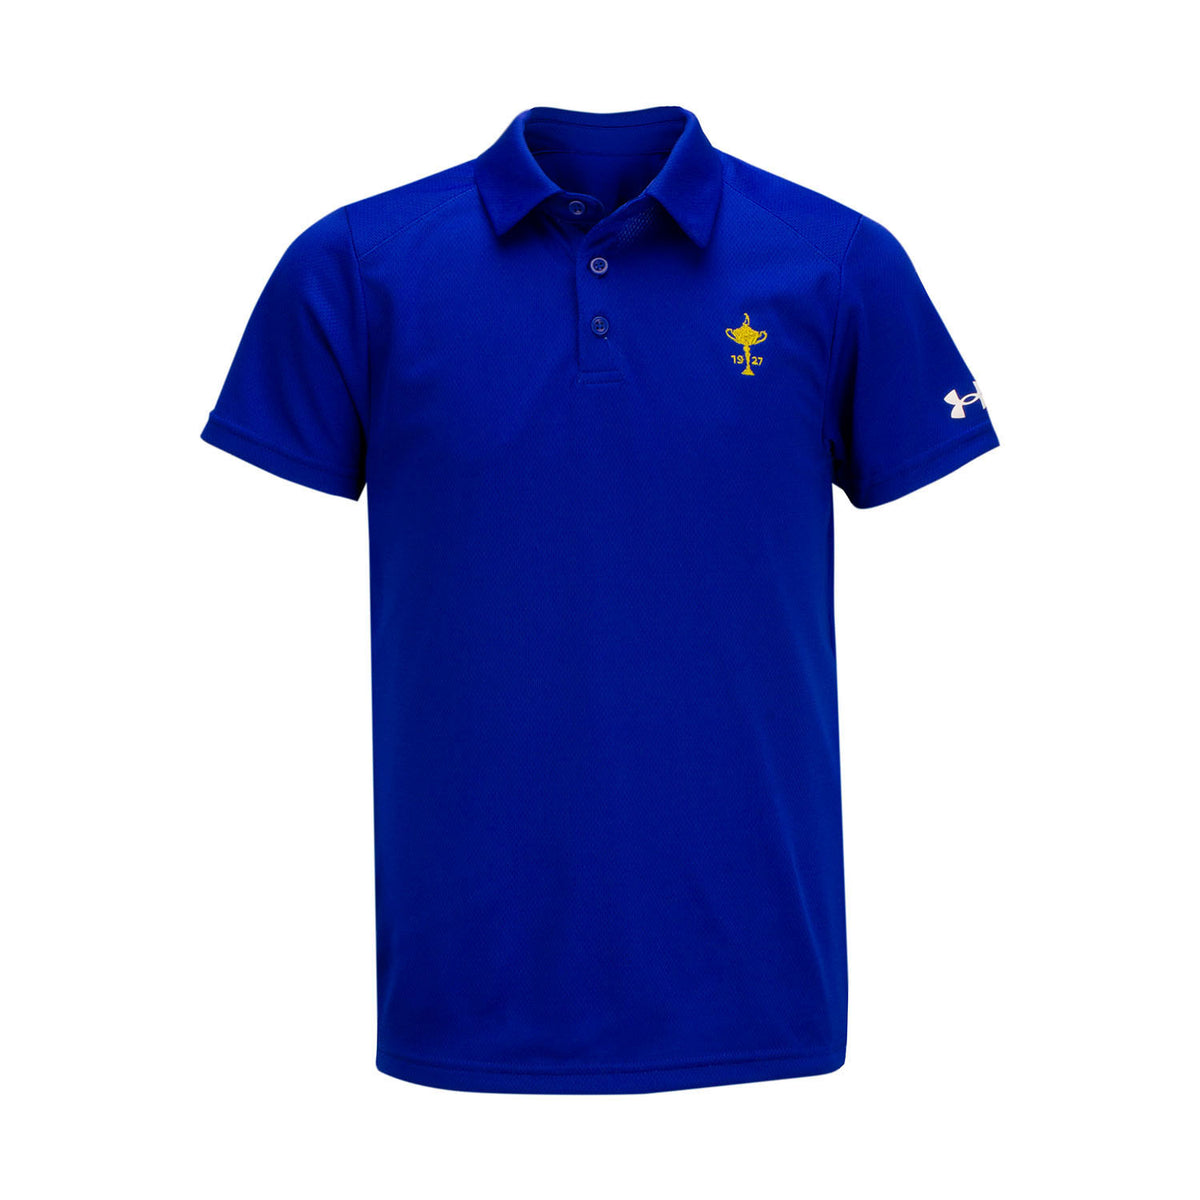 Boys Youth Tech Mesh Polo in Blue- Front View